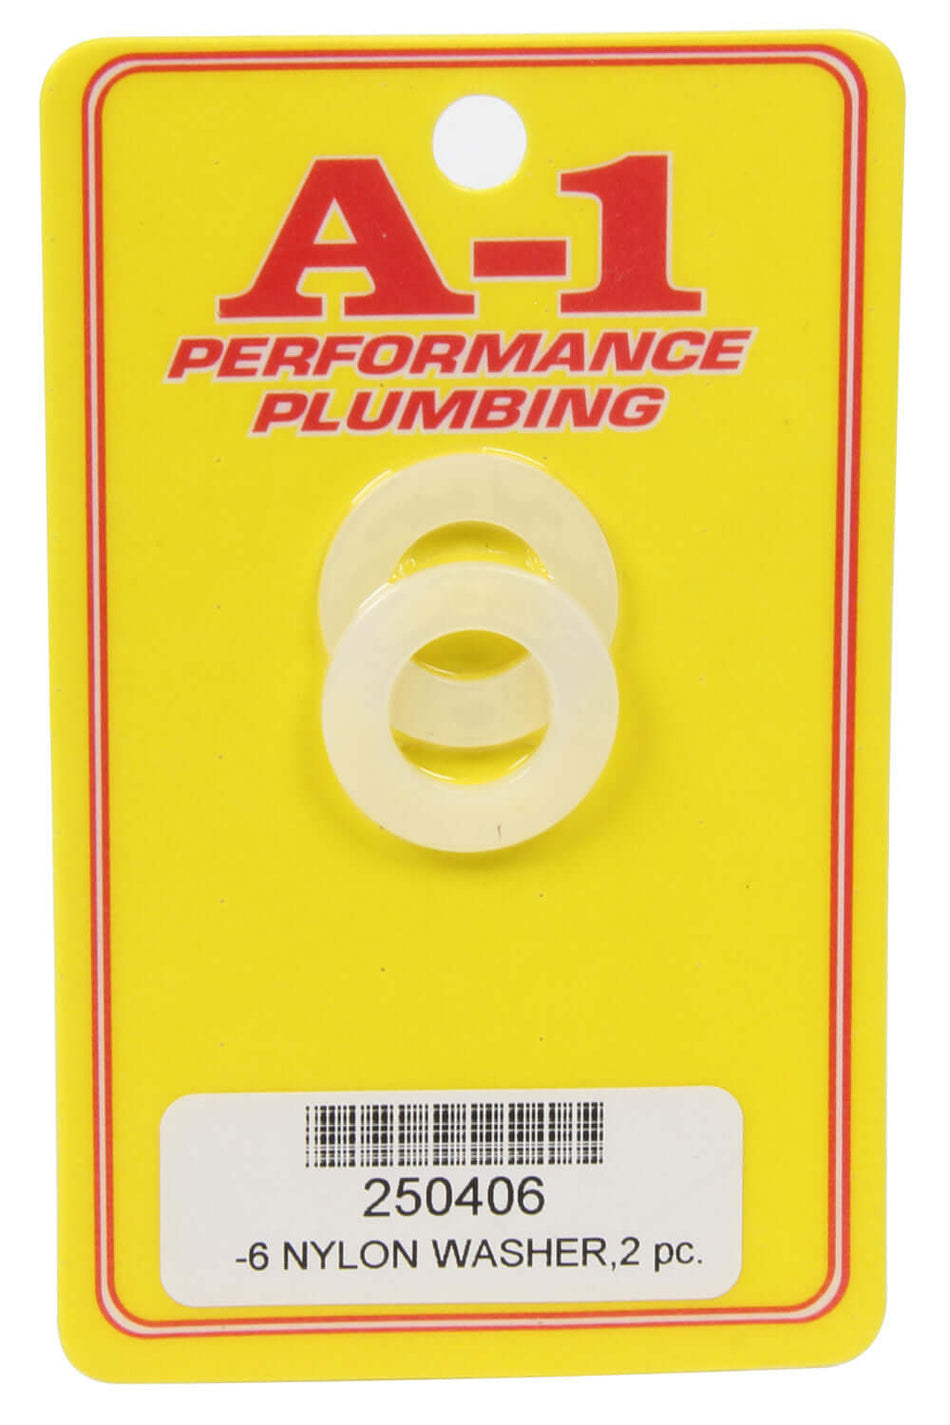 AN-6 Poly Washer 2pcs - $3.99